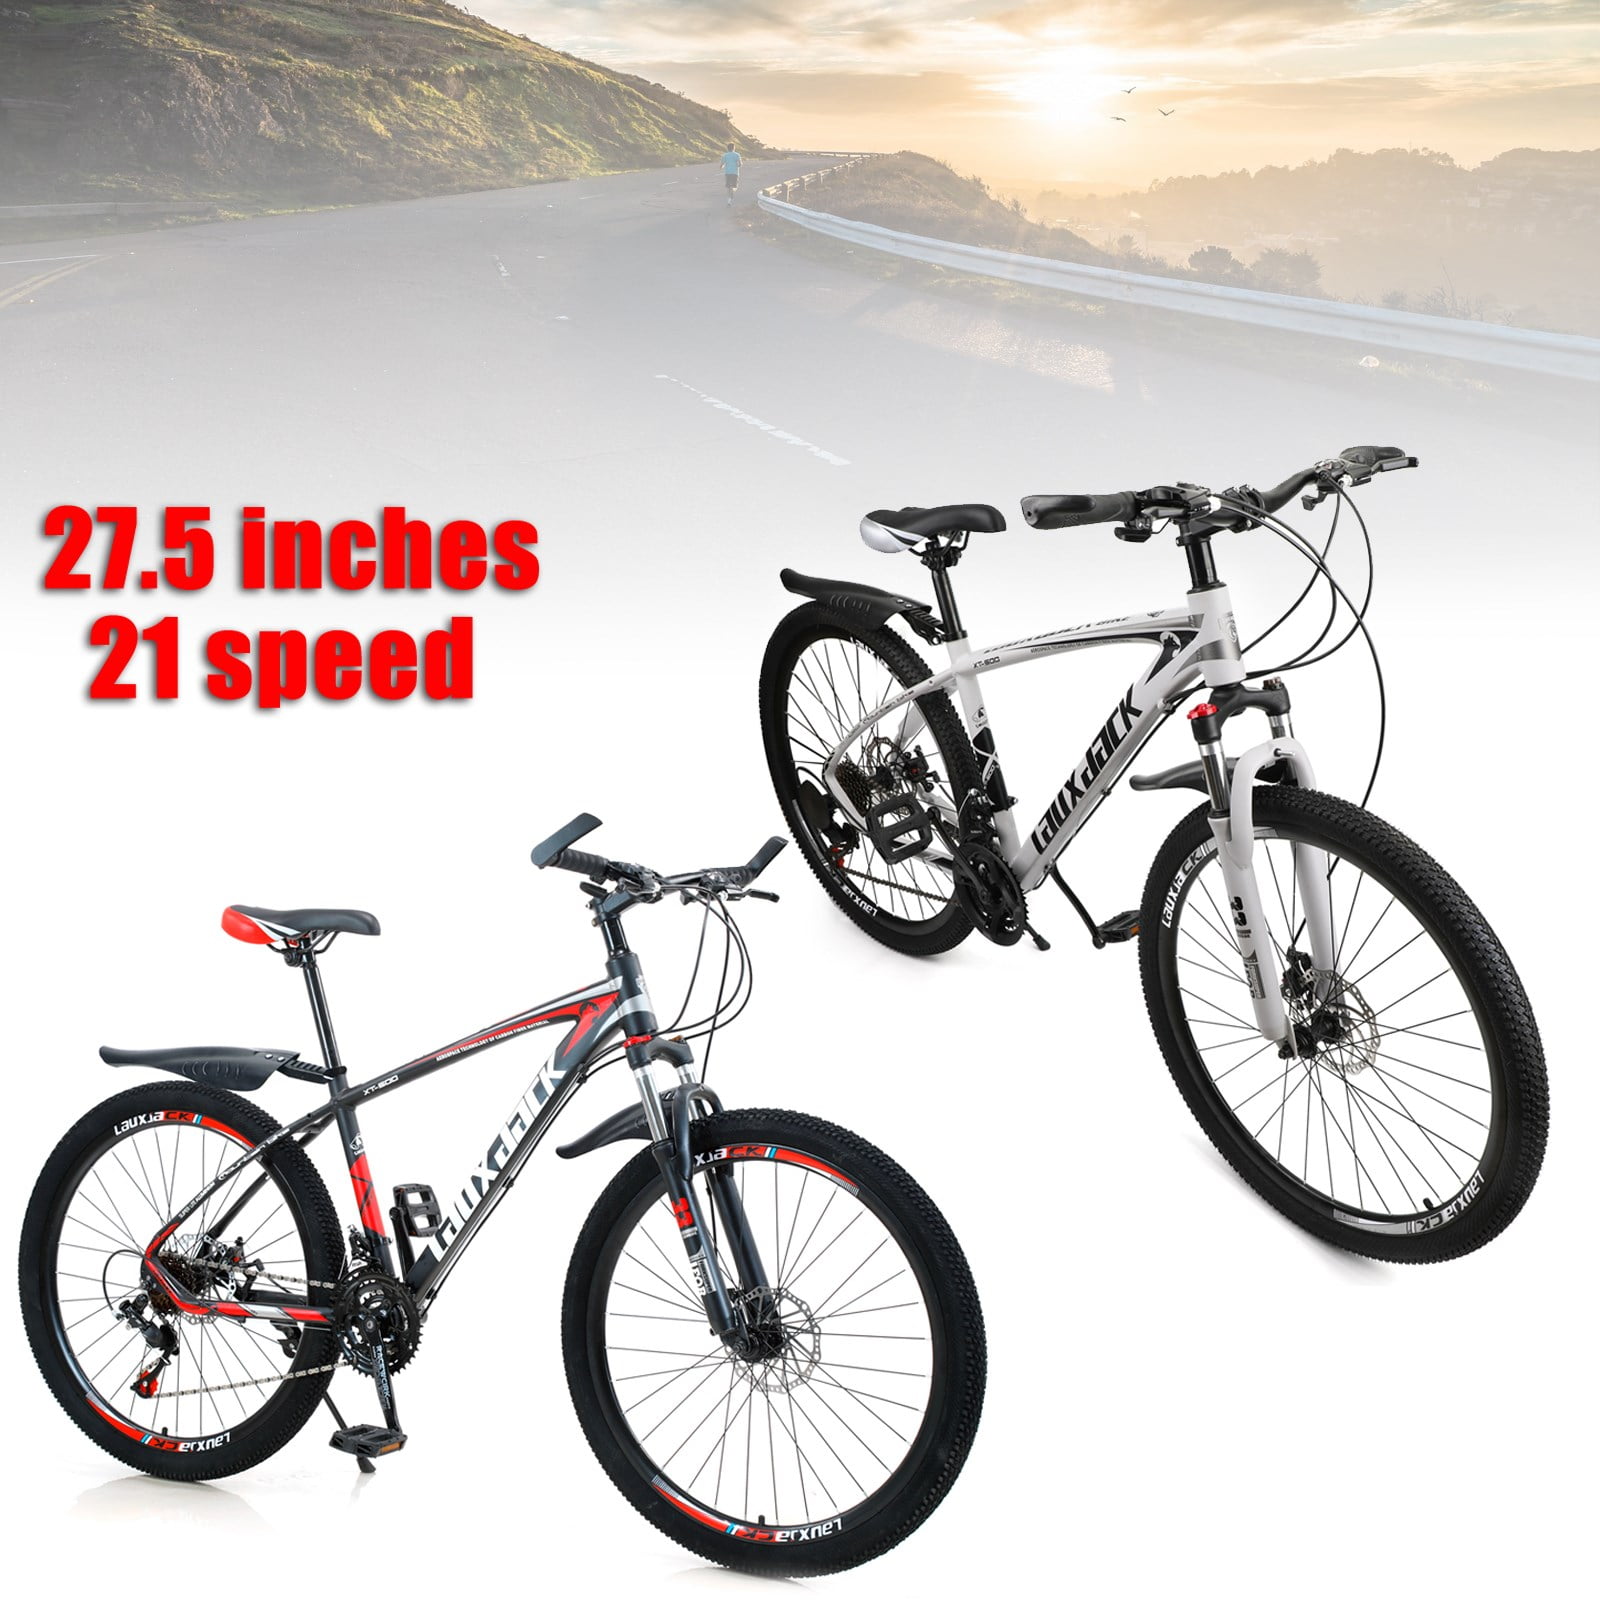 Details about   27.5 inches Wheels Adults Mountain Bike 21 Speed Bikes Bicycle MTB Black&Red 